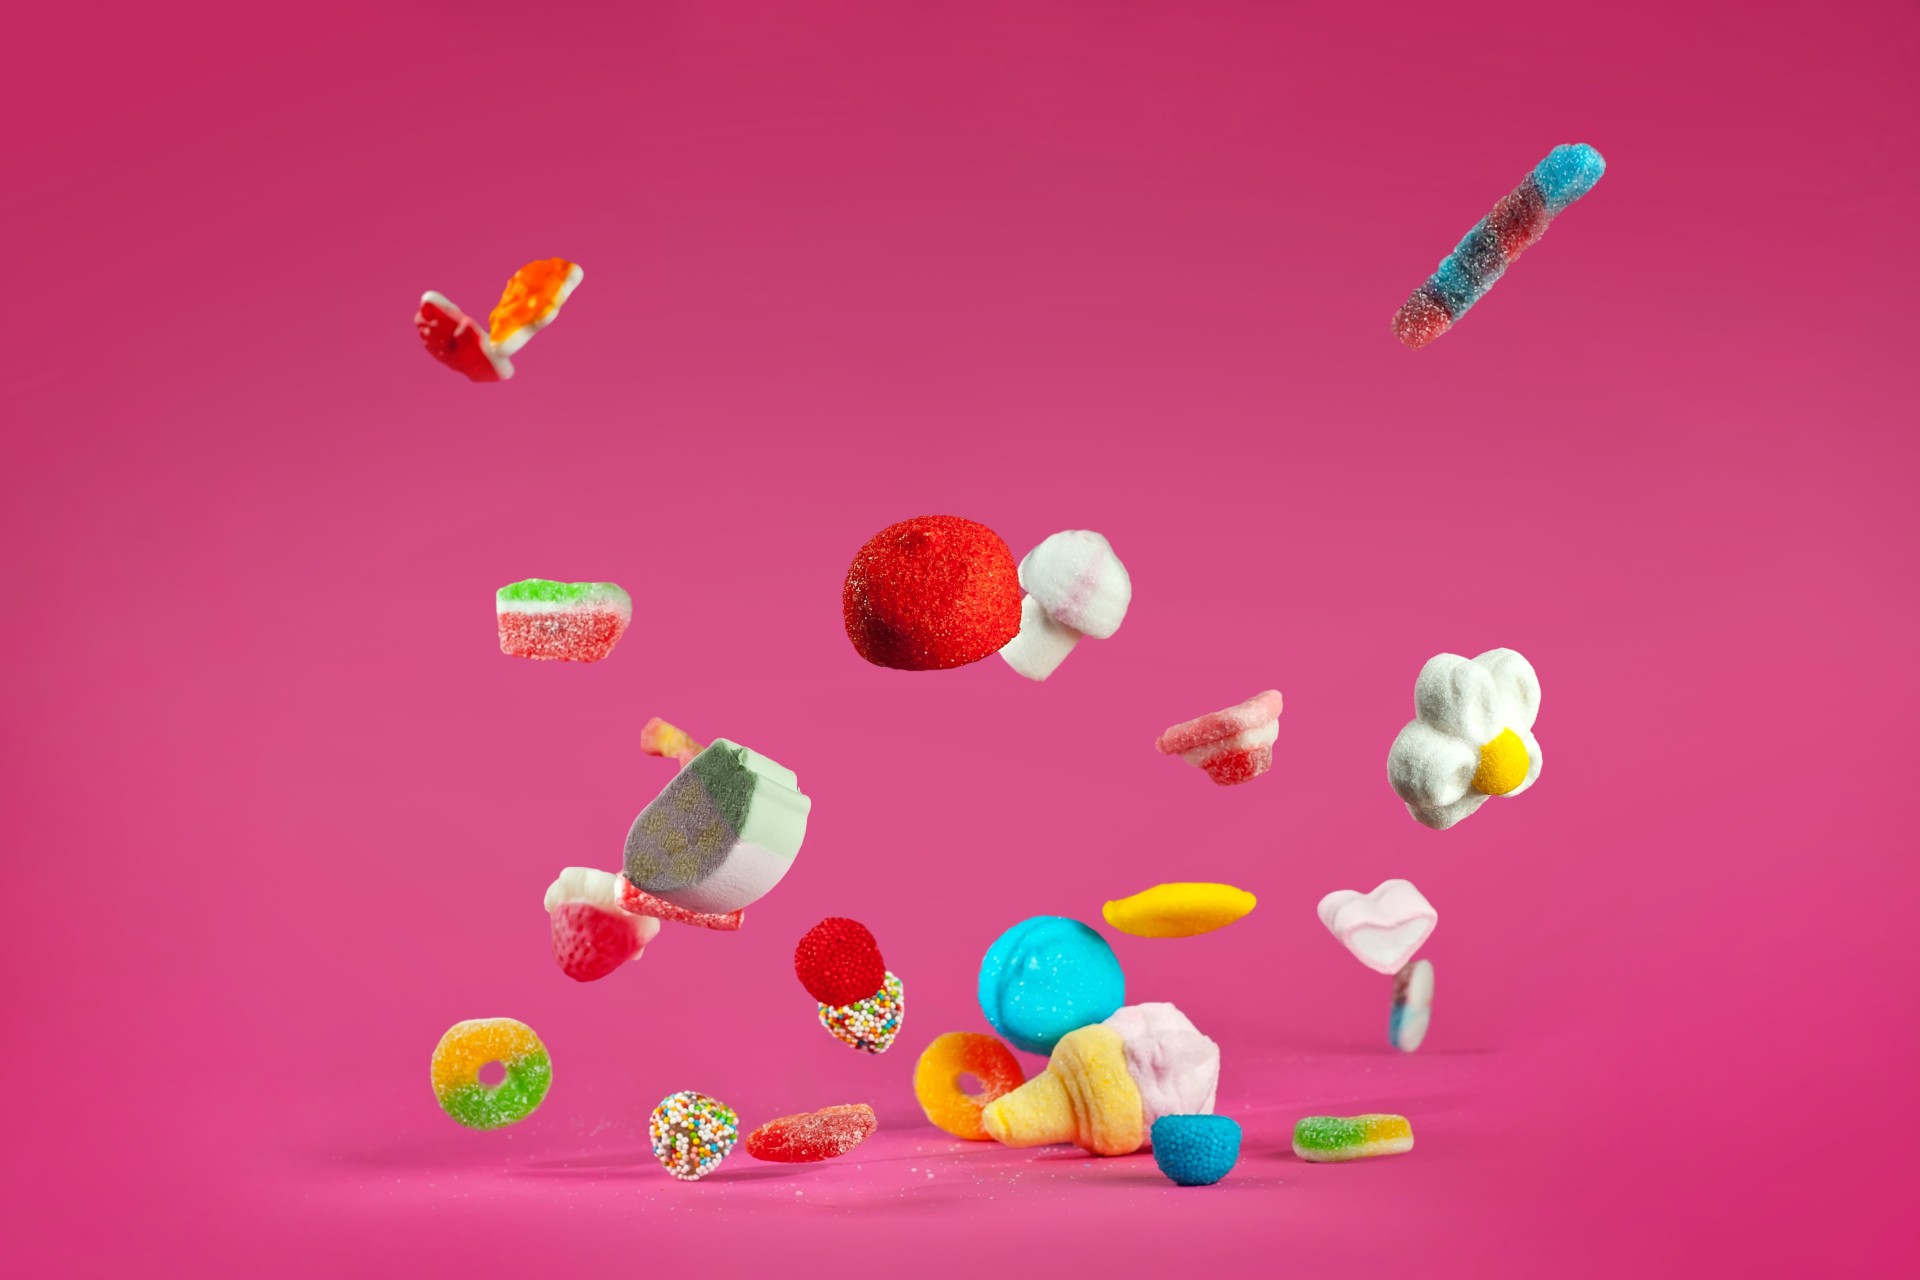 a pile of gummy, sugar-filled candy falls in front of a bright pink background